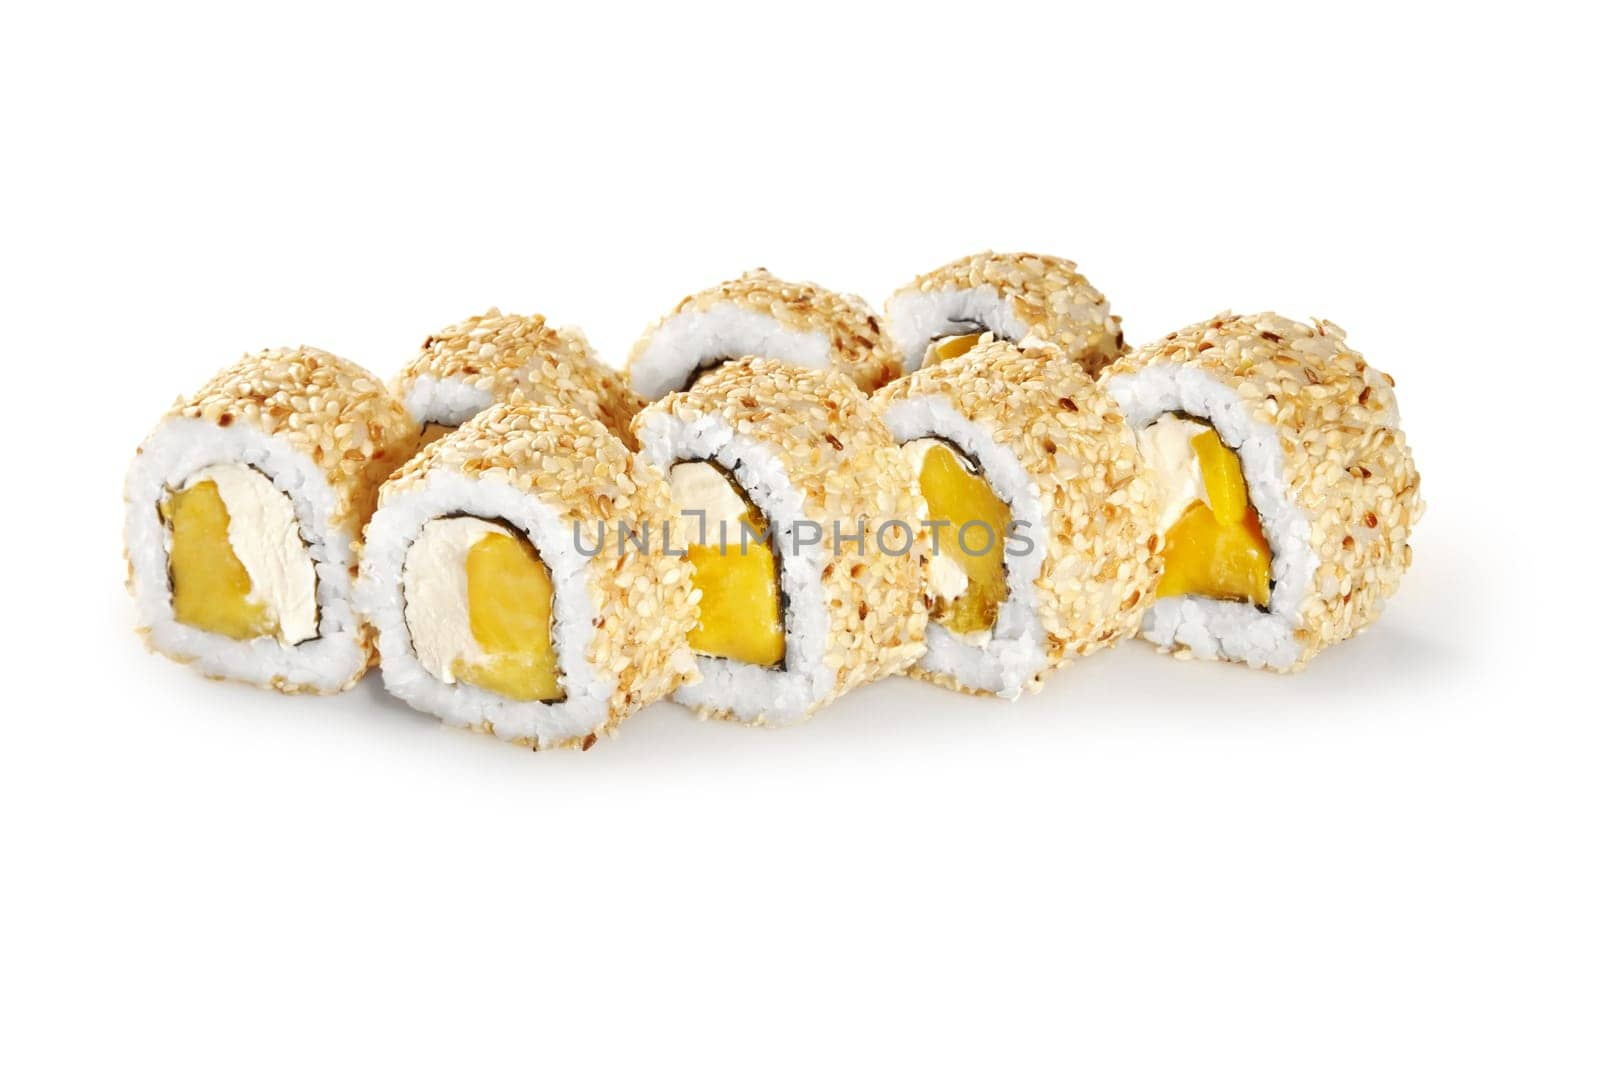 Exotic sushi roll filled with delicate cream cheese and sweet ripe mango slices, generously sprinkled with sesame seeds presented on white background. Japanese style cuisine